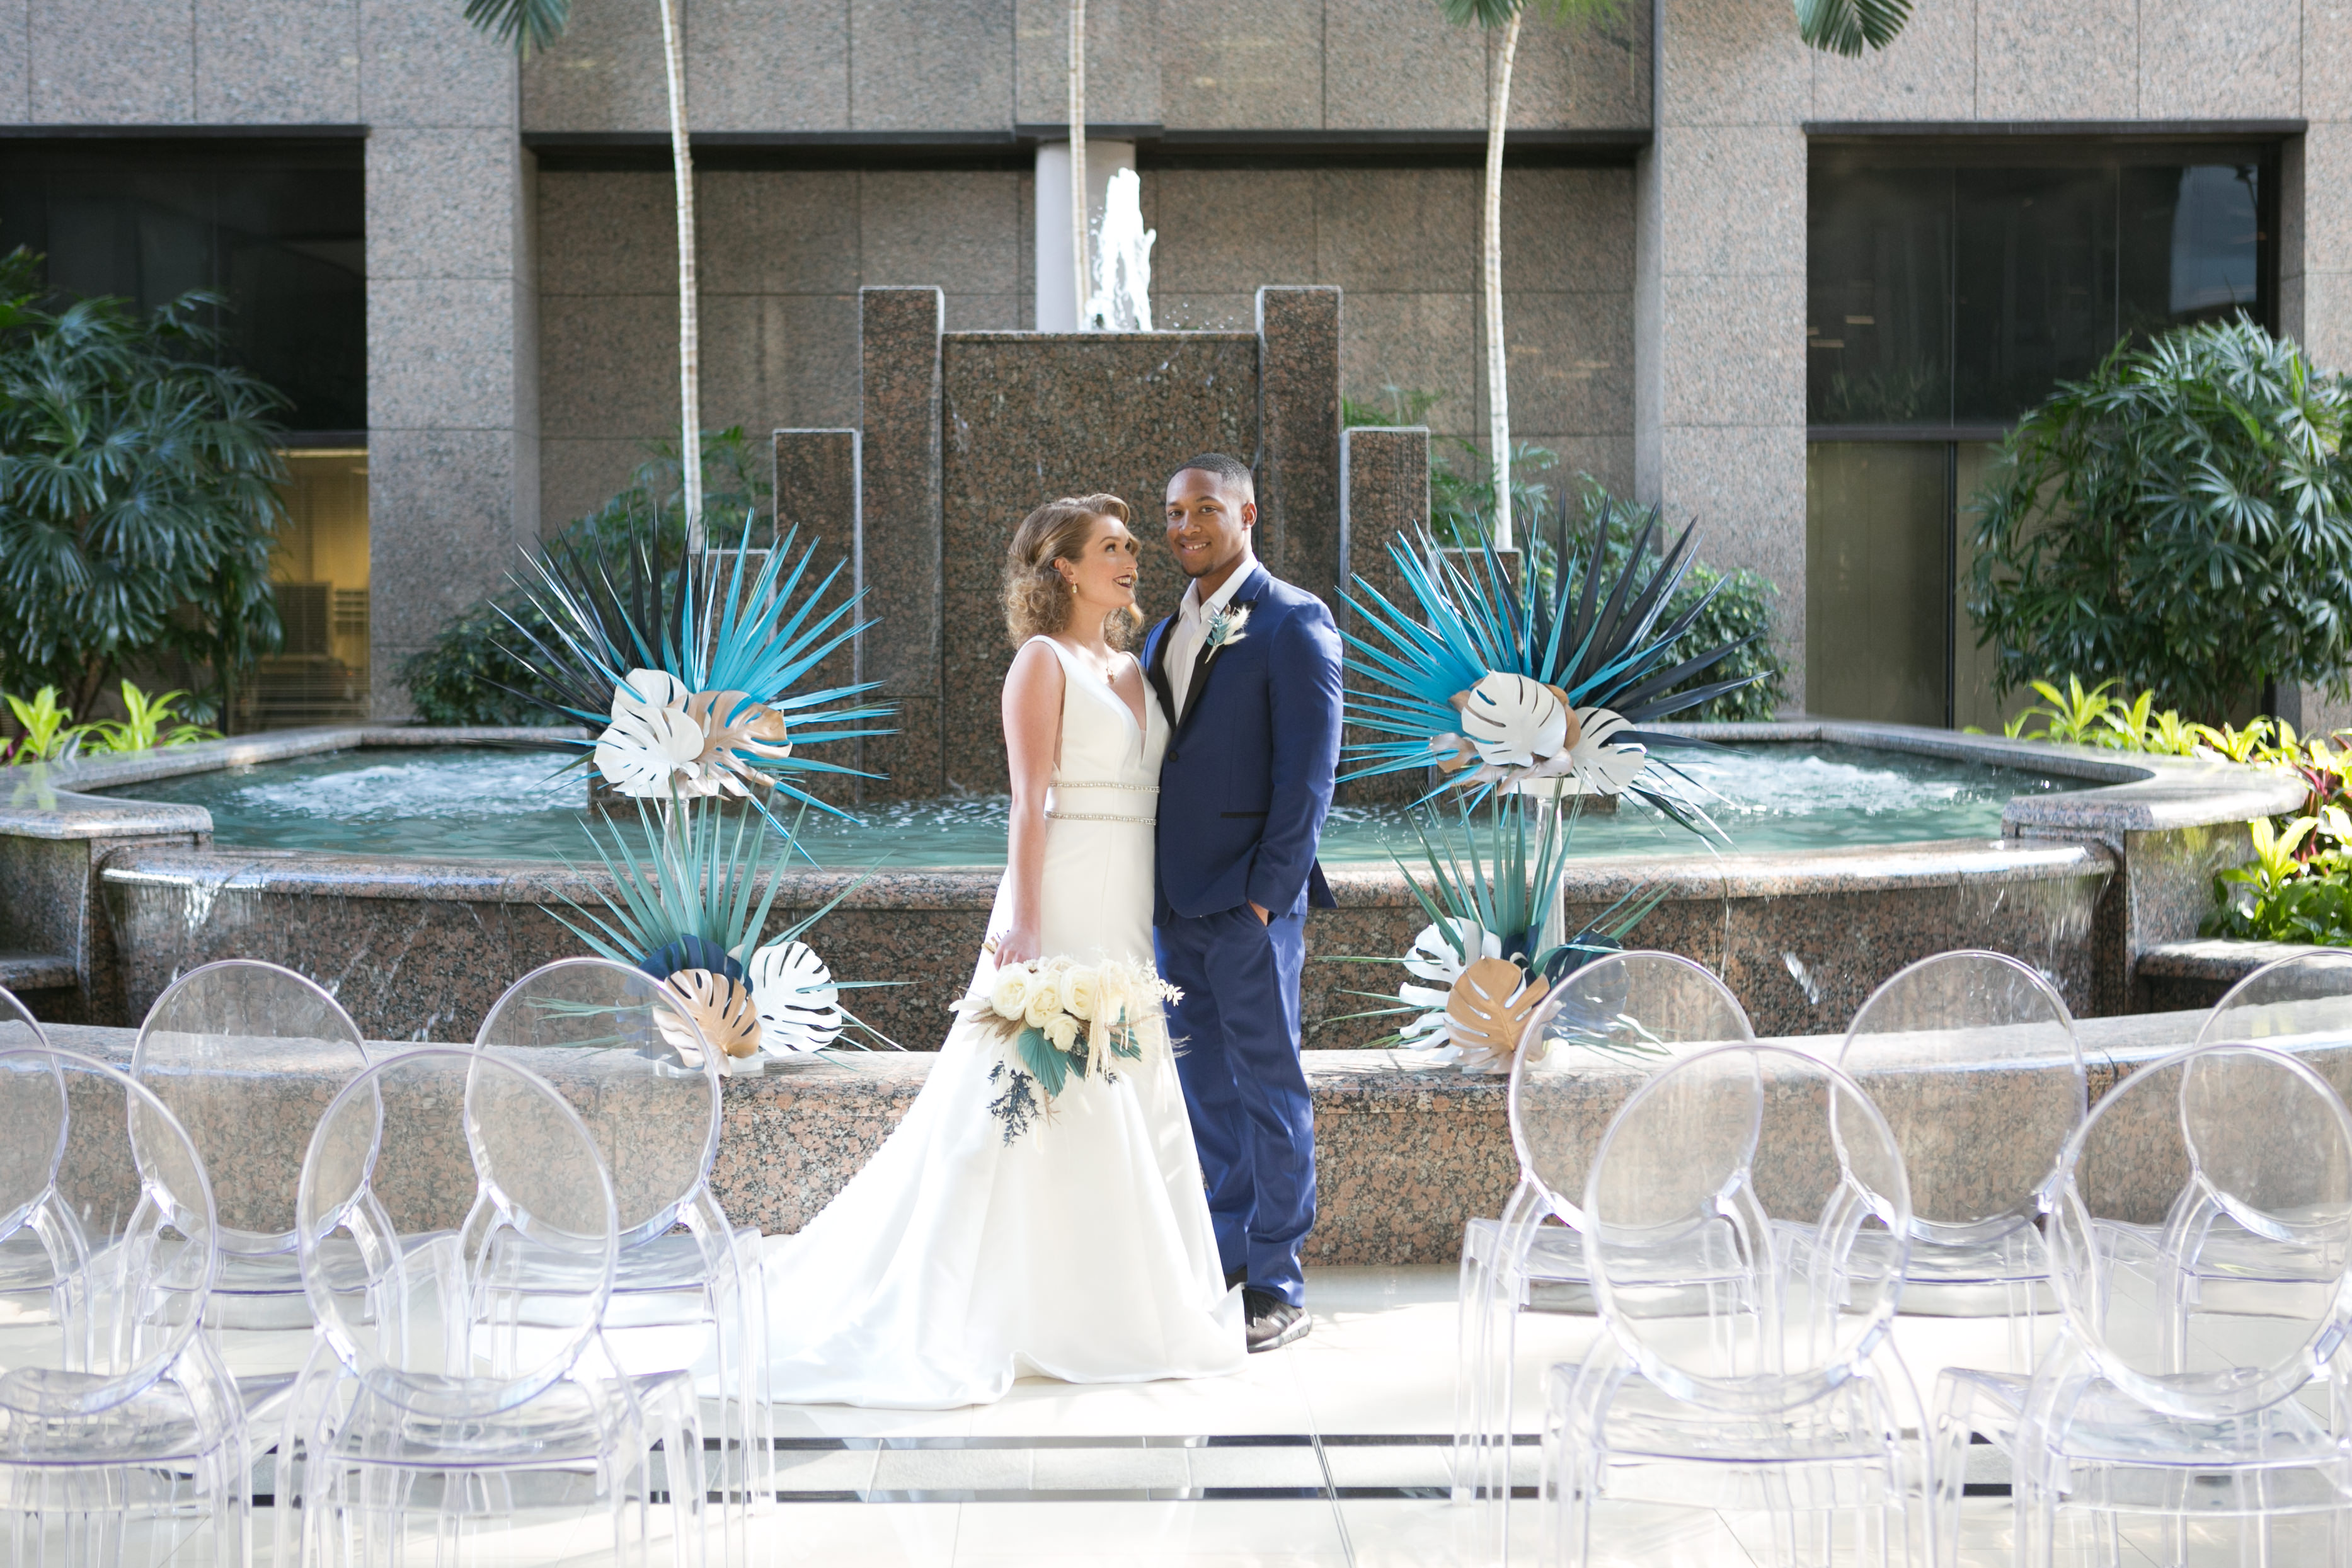 Bride and Groom Wedding Ceremony Portrait, Bride in Classic A-Line V Neck Wedding Dress Holding Ivory Roses and Greenery Bridal Floral Bouquet, Groom in Blue Suit, Green, Ivory and Gold Palm Tree and Monstera Leaves and Ghost Chair Wedding Ceremony Seating Fountain Portrait | Tampa Wedding Chair Rentals Gabro Event Services | Wedding Photographer Carrie Wildes Photography | Wedding Venue Centre Club | Wedding Planner and Florist John Campbell Weddings | Wedding Attire Truly Forever Bridal